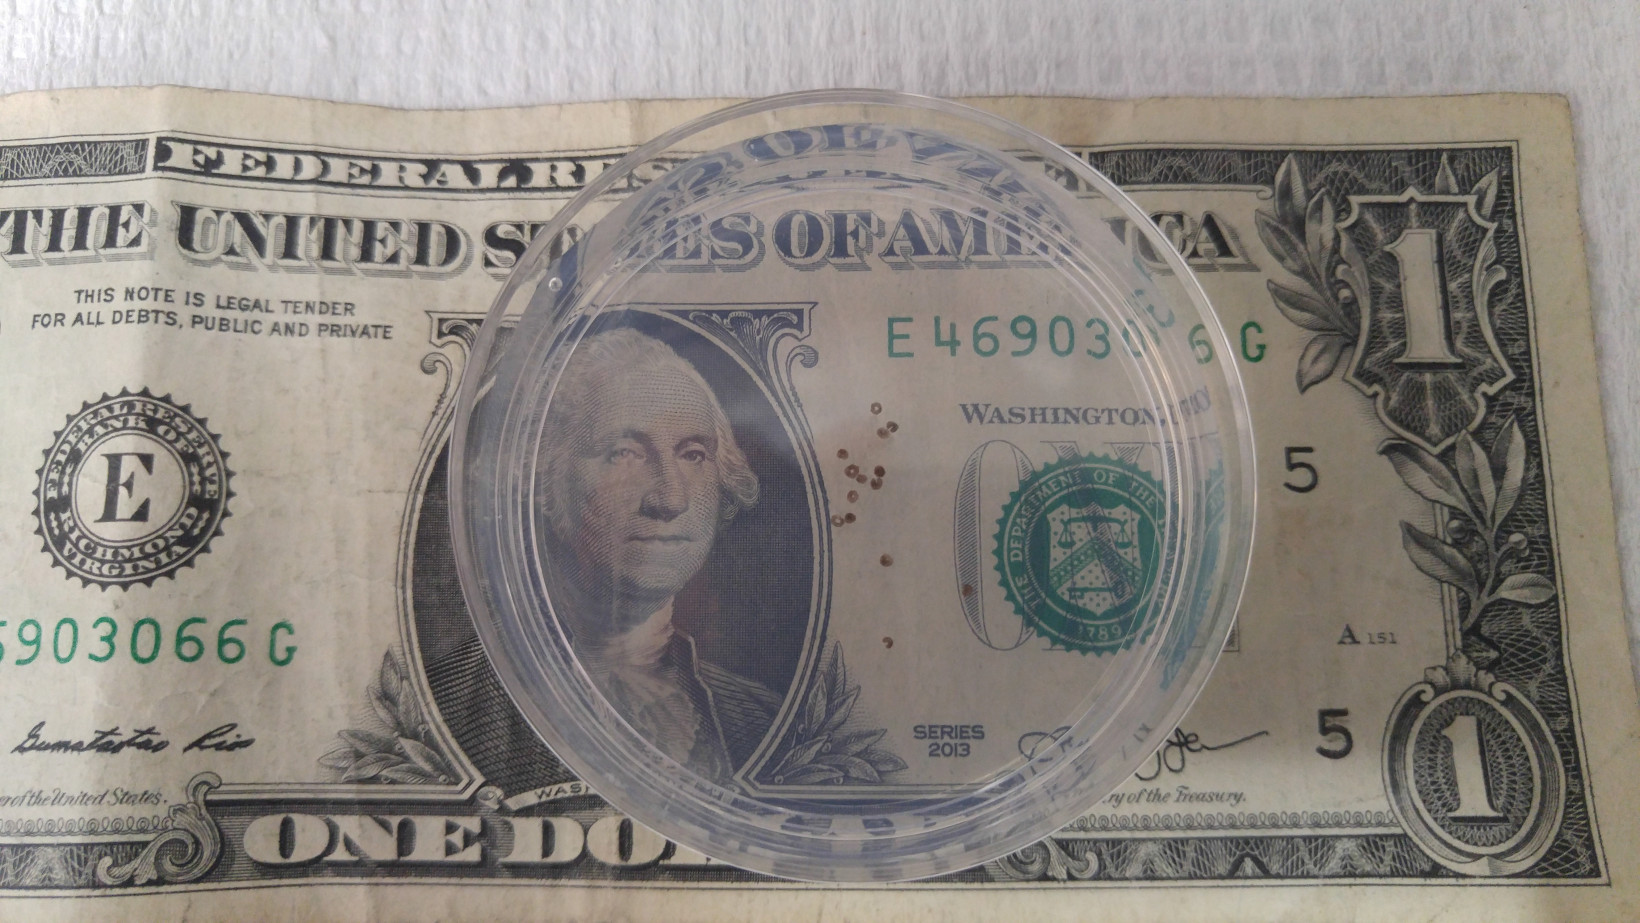 A group of AI-designed organisms in a petri dish over a dollar bill for scale.